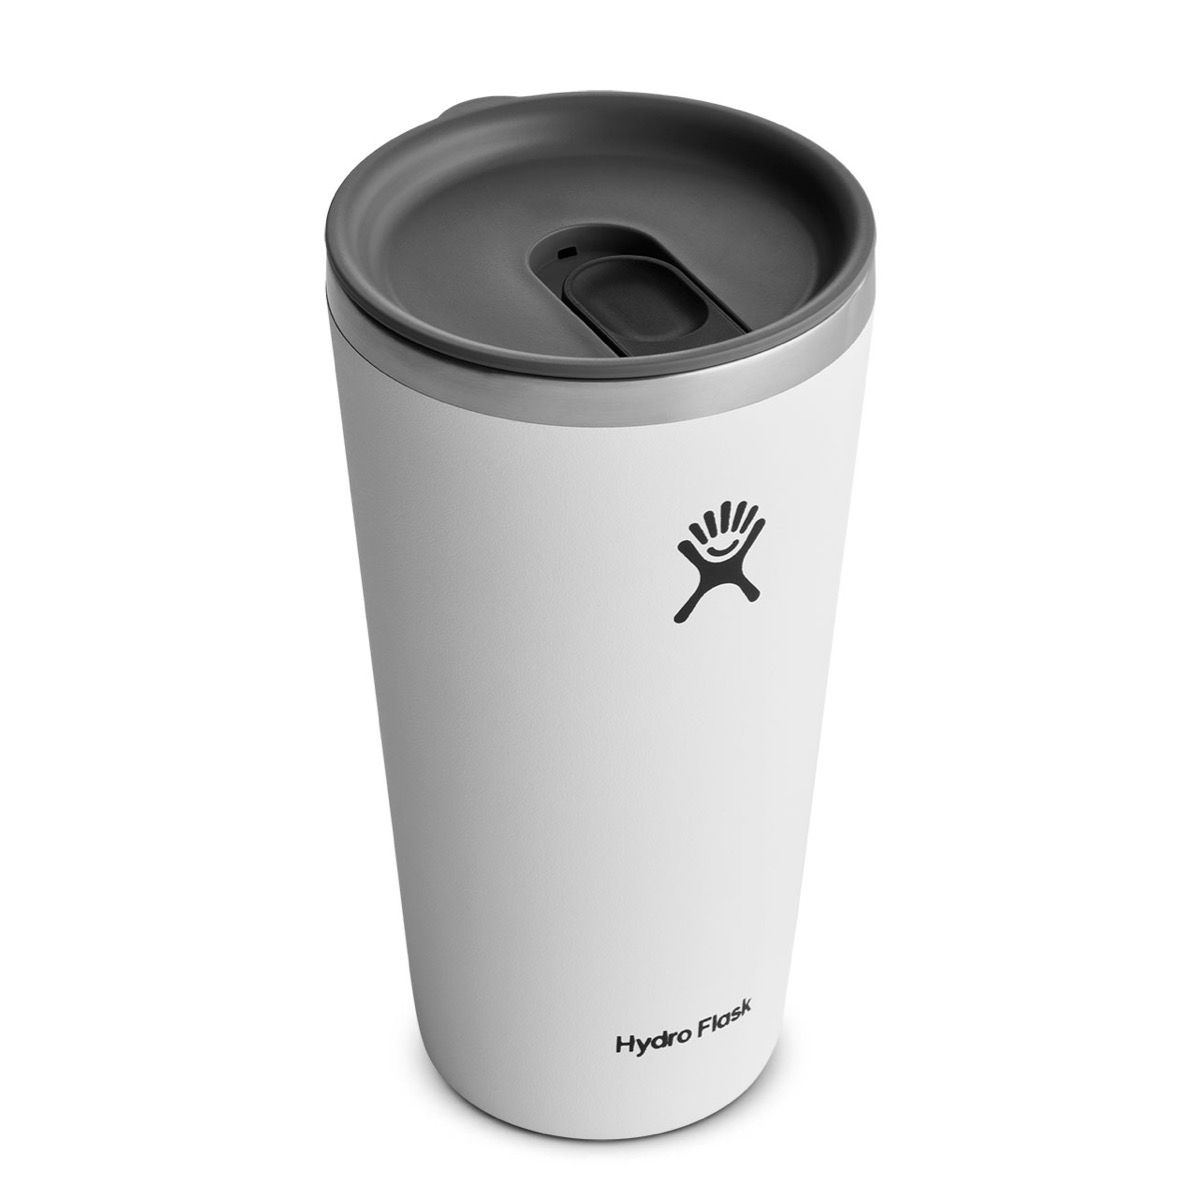 Hydro Flask 12 oz Slim Cooler Cup - Landsharks Outfitters